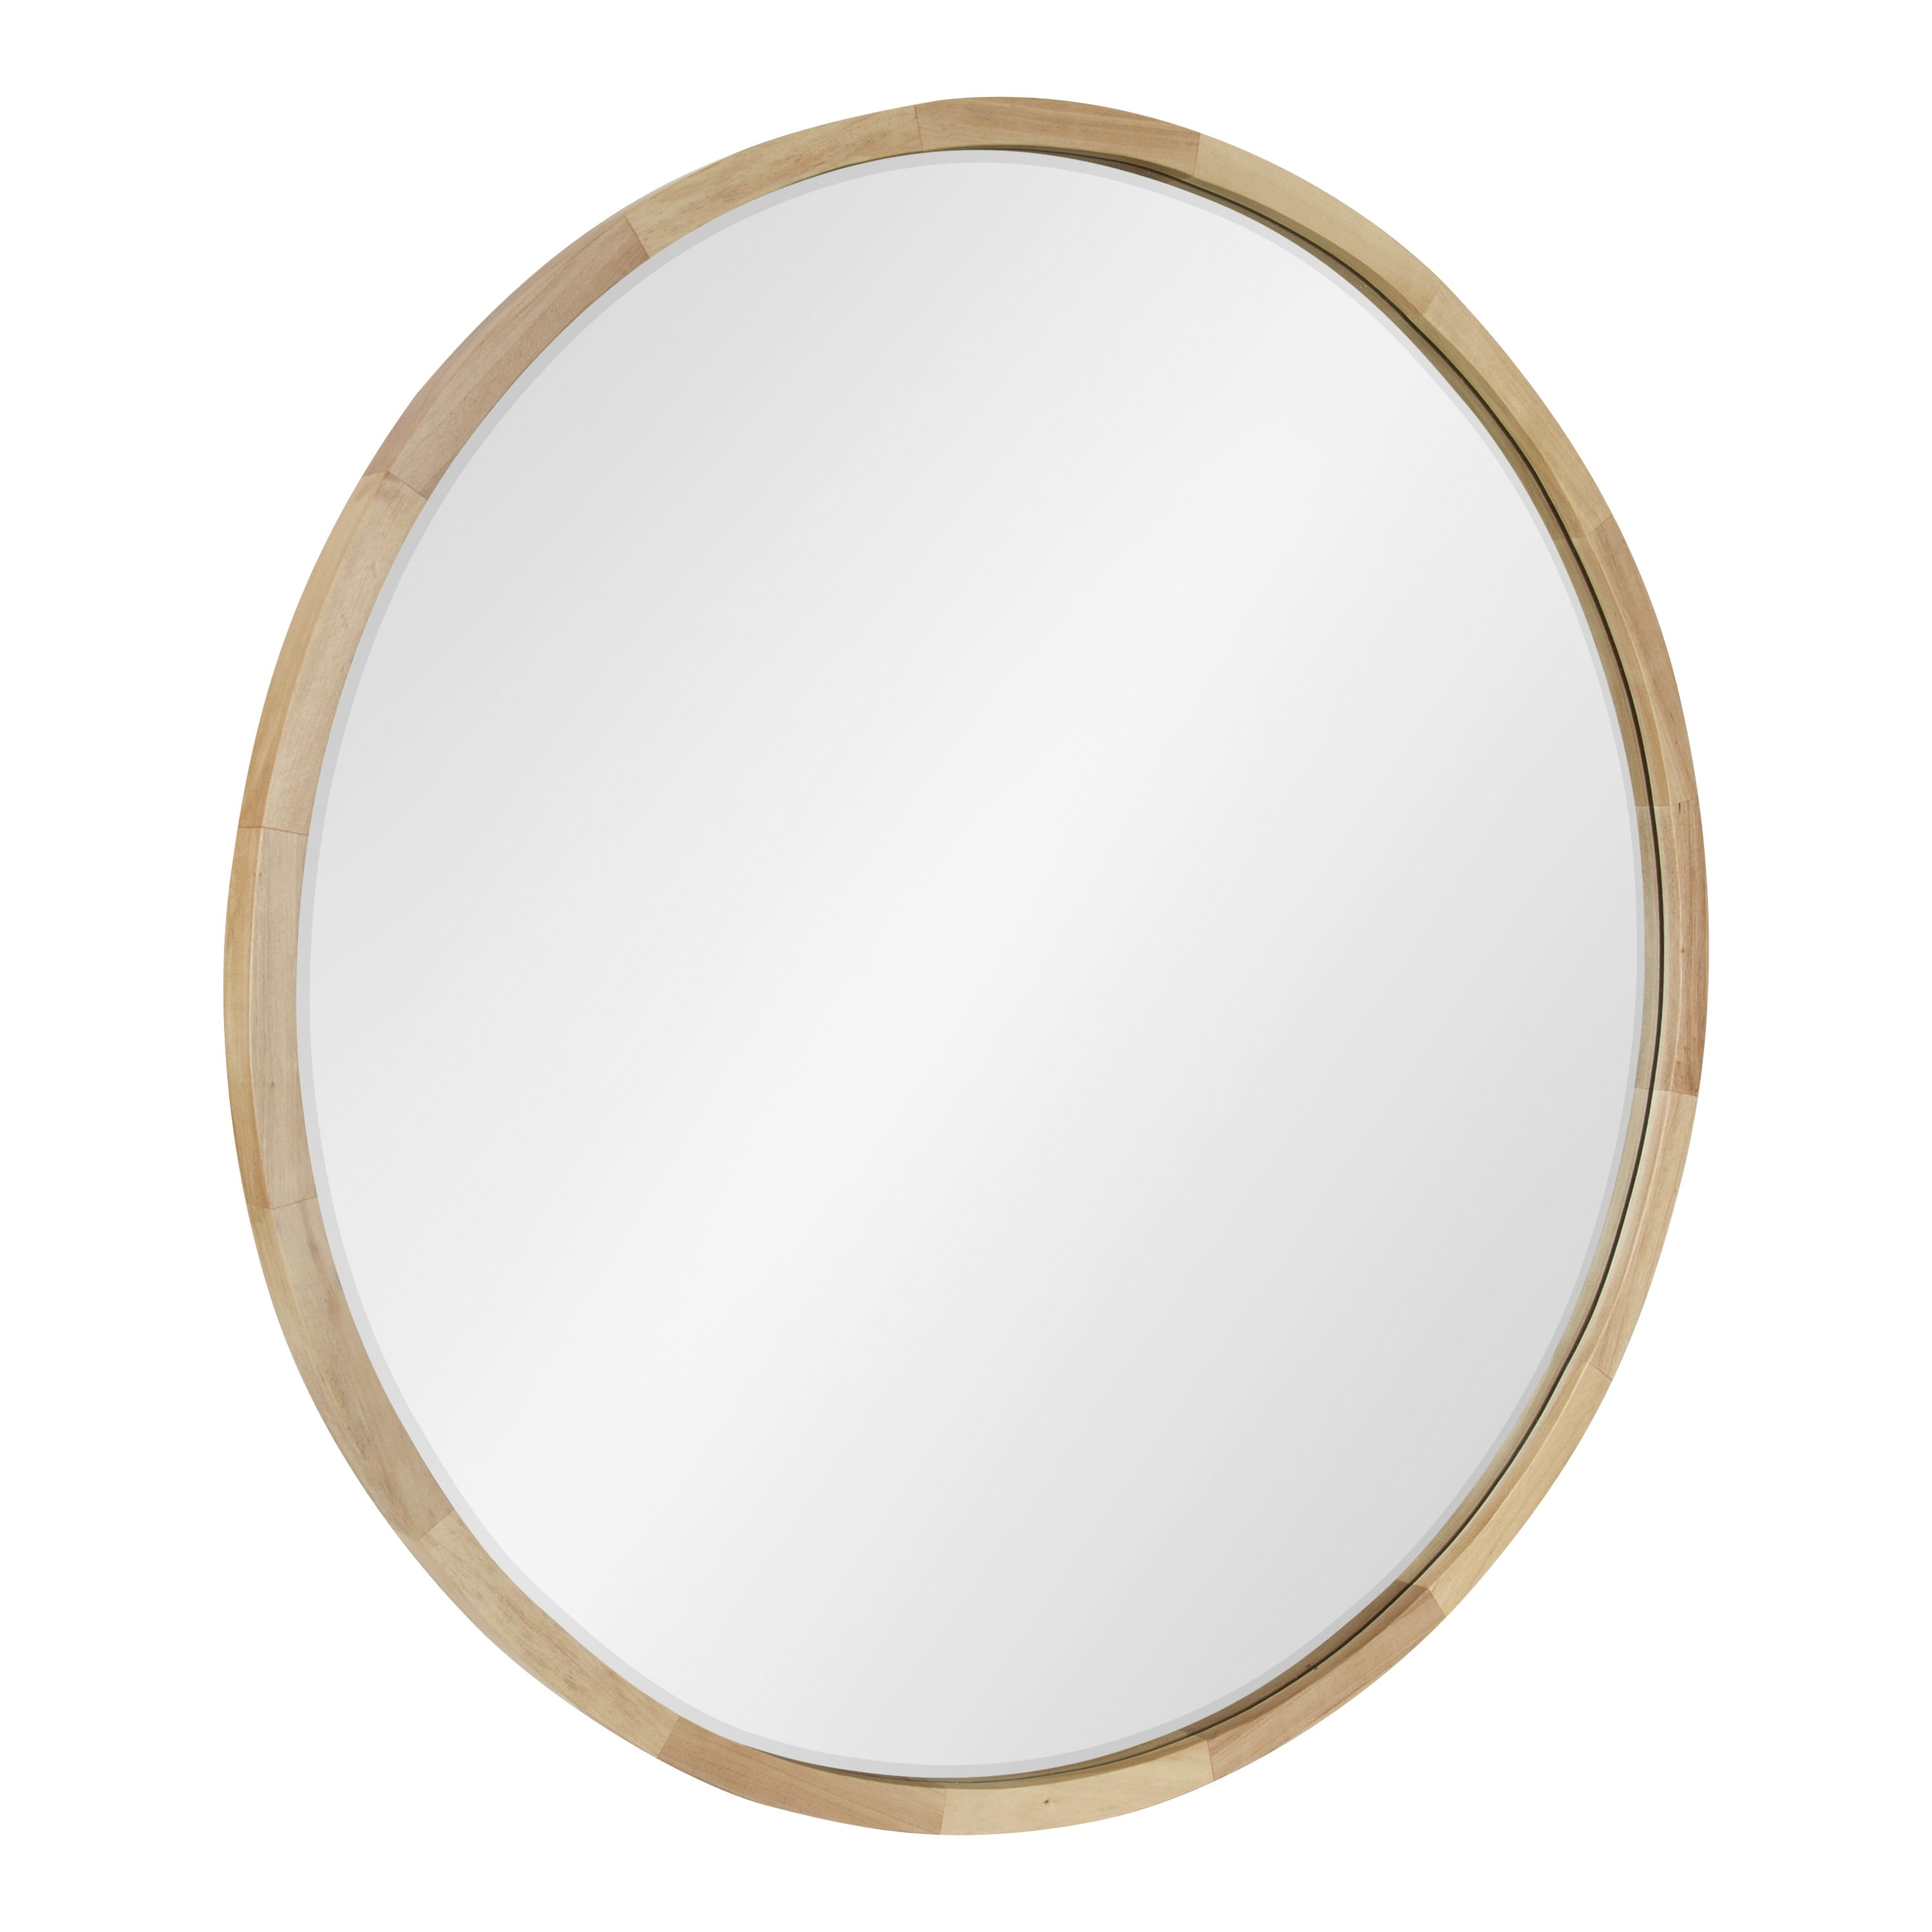 Kate And Laurel Mclean Mid Century Wood, 30 Inch Round Wood Framed Mirror